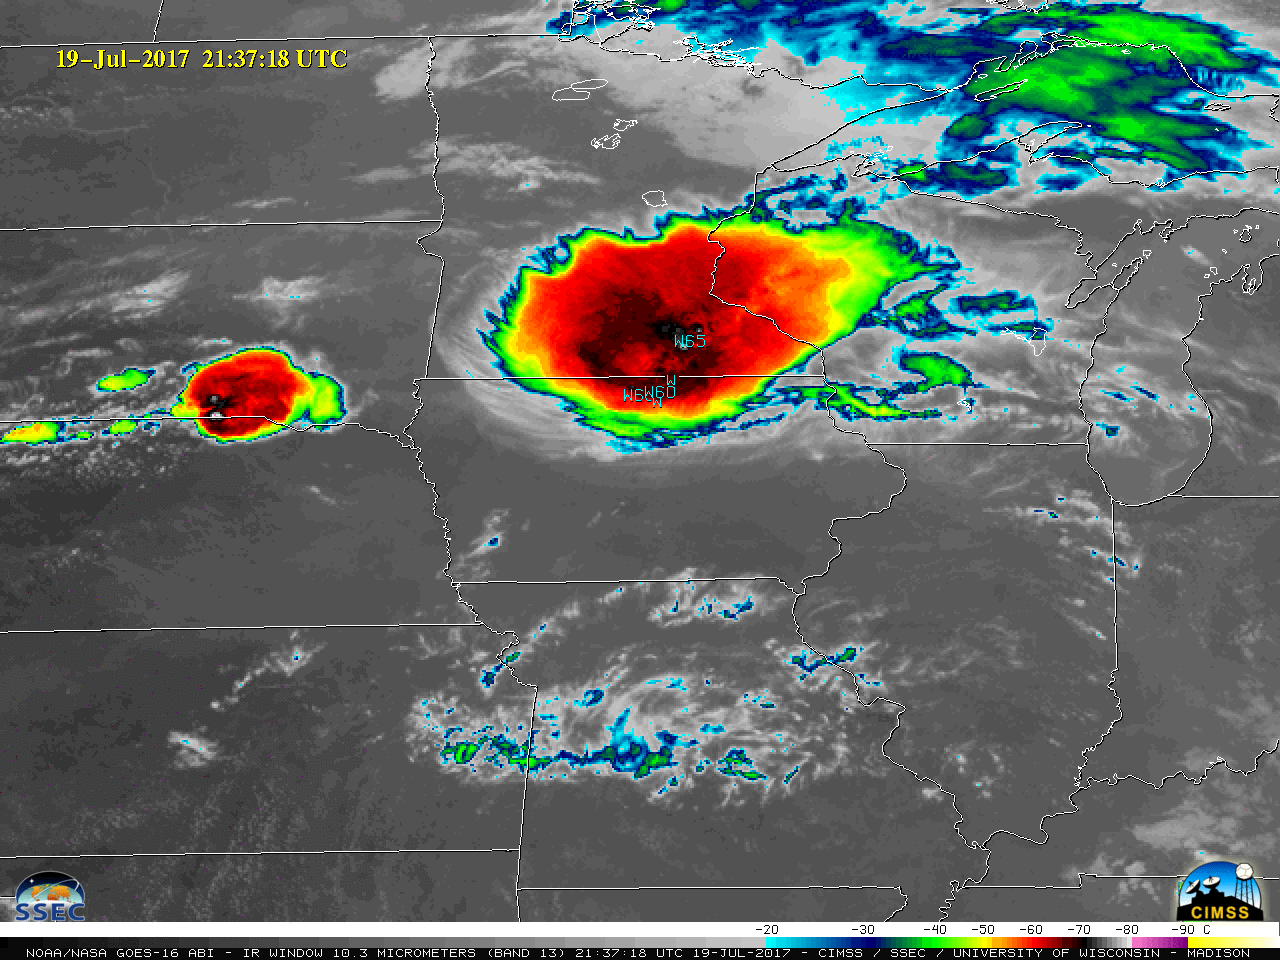 GOES-16 Infrared Window (10.3 µm) images, with SPC storm reports plotted in cyan [click to play MP4 animation] 